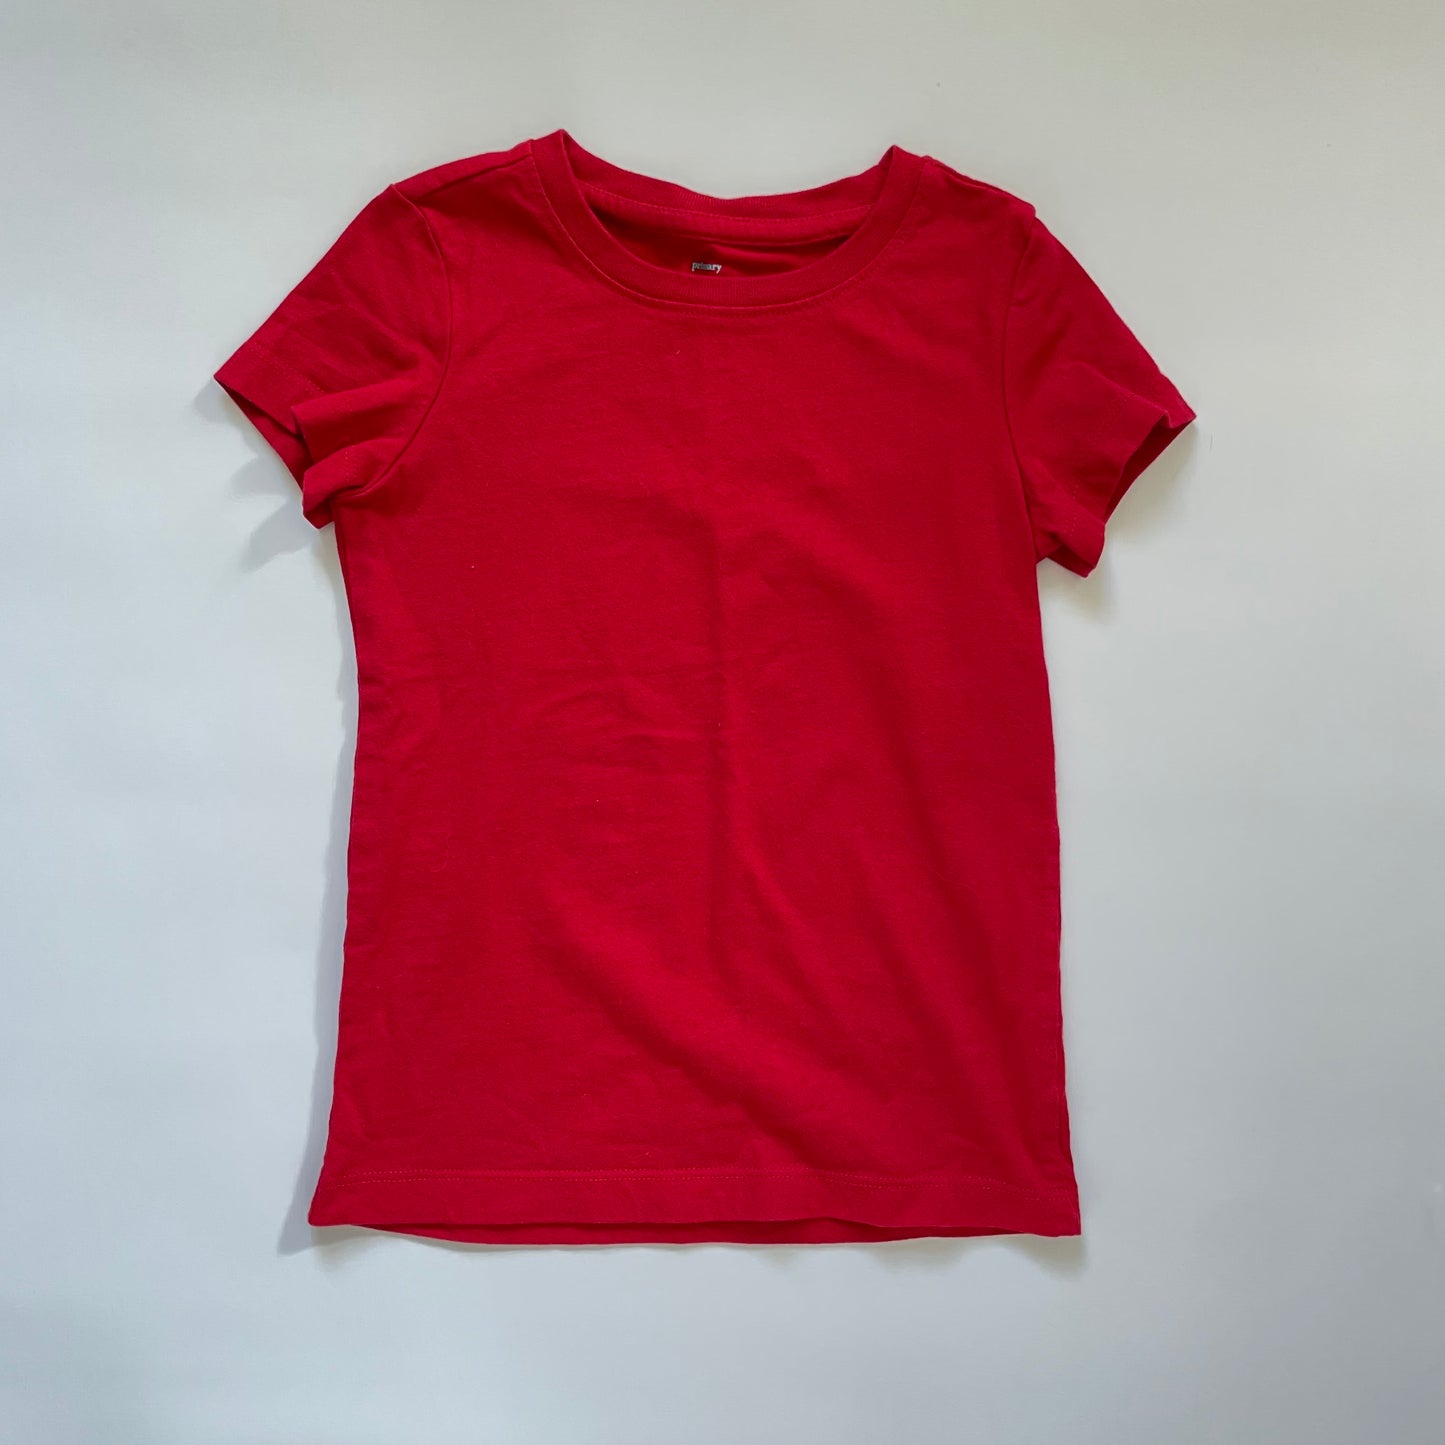 Girl's Red Primary Top, 4-5